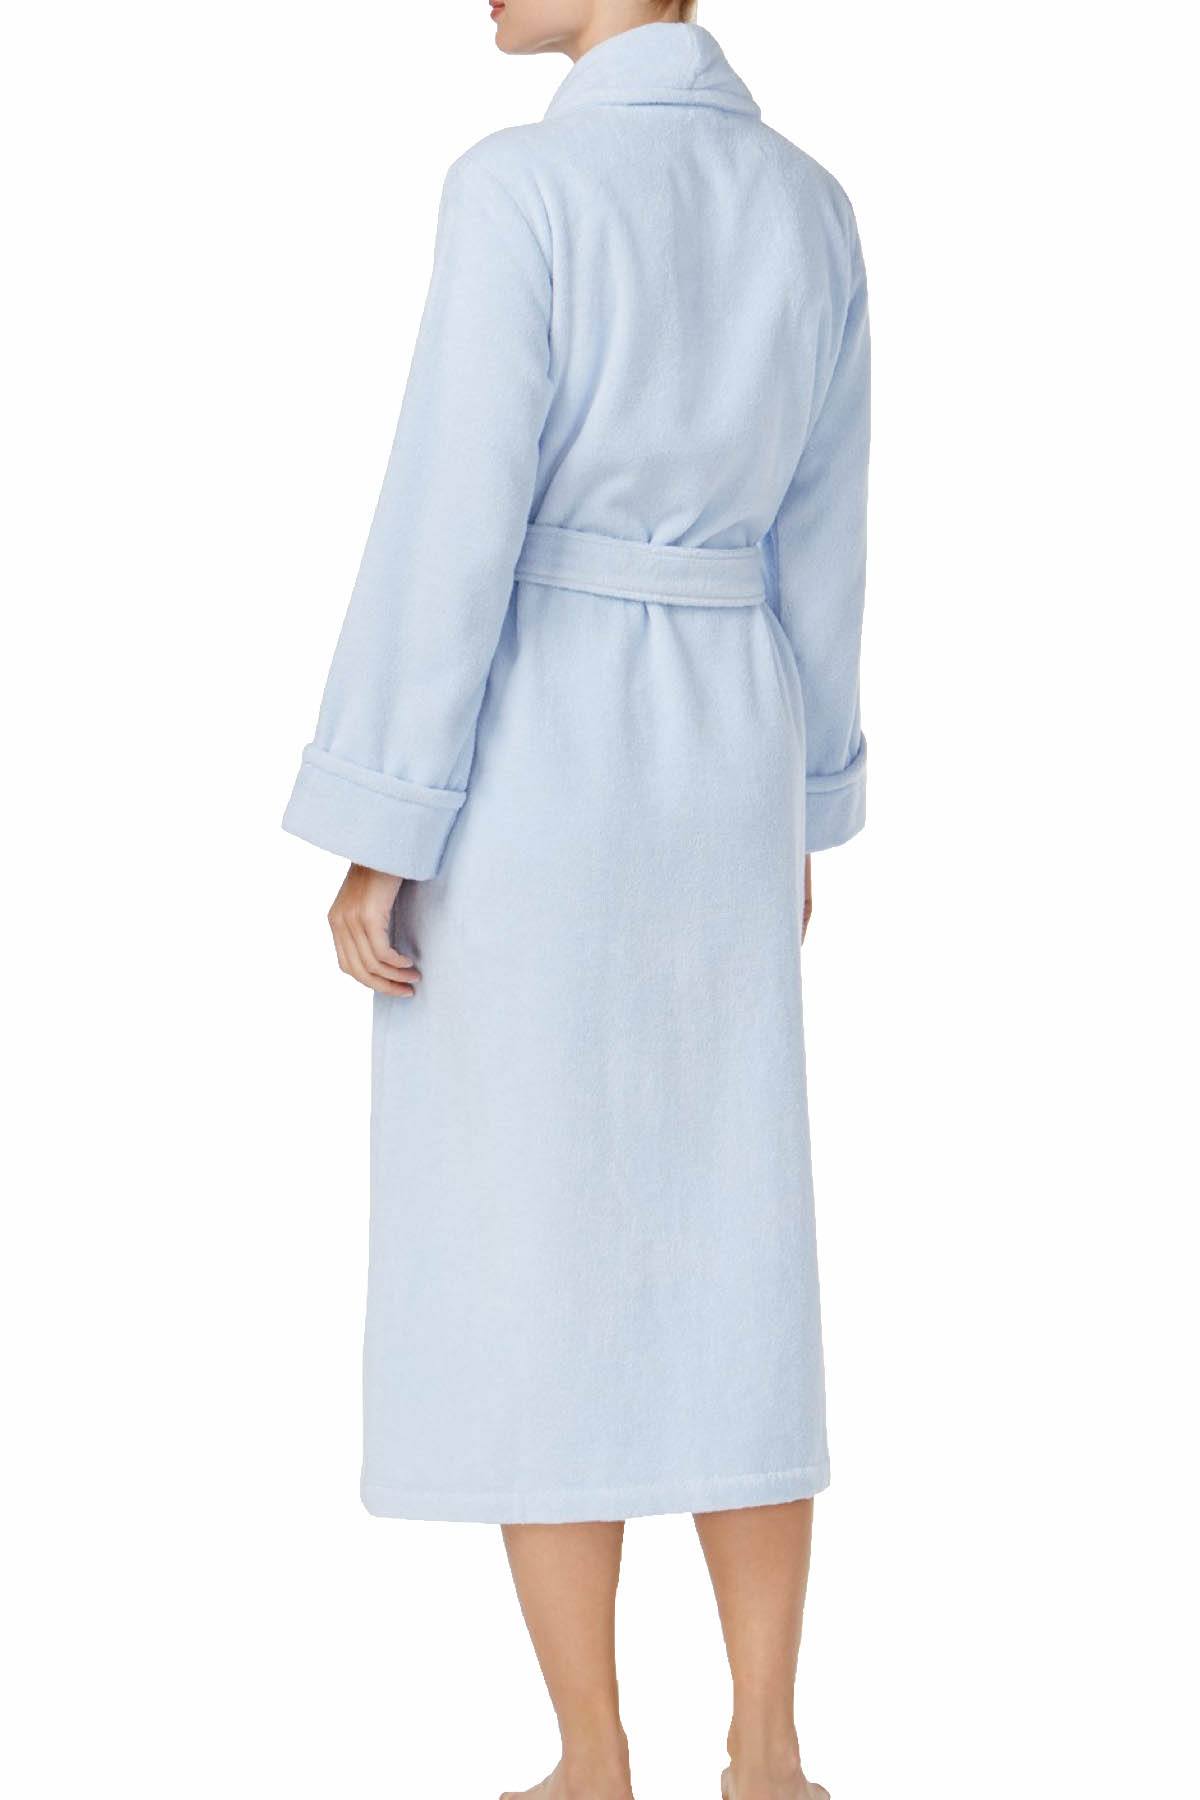 Charter Club Intimates Blue-Alder Luxe Cotton Terry Long Wrap Robe